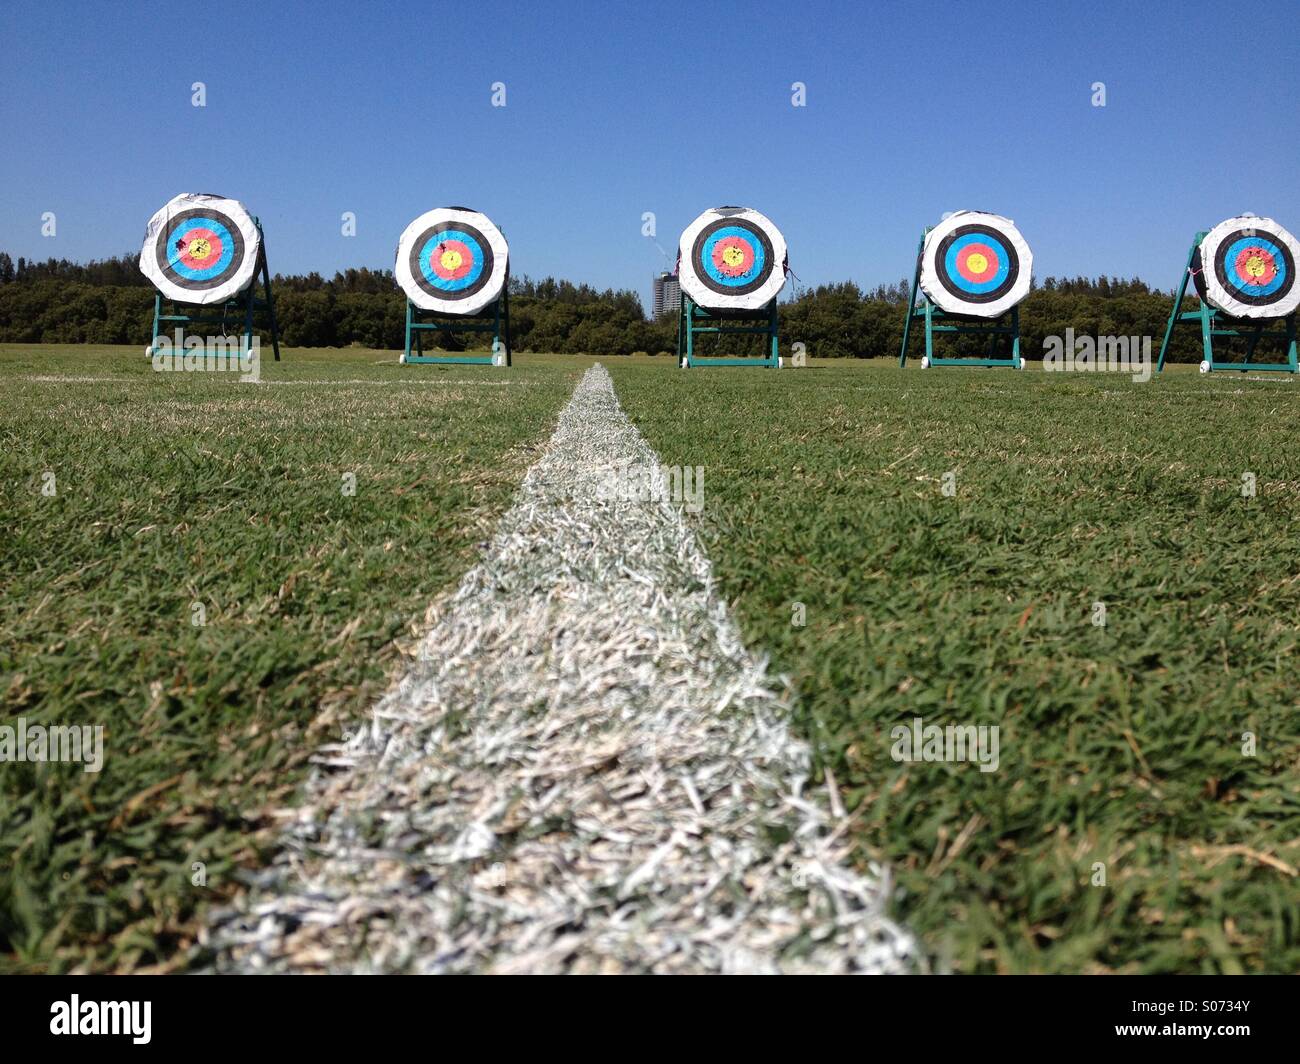 A row of targets on an archery field Stock Photo